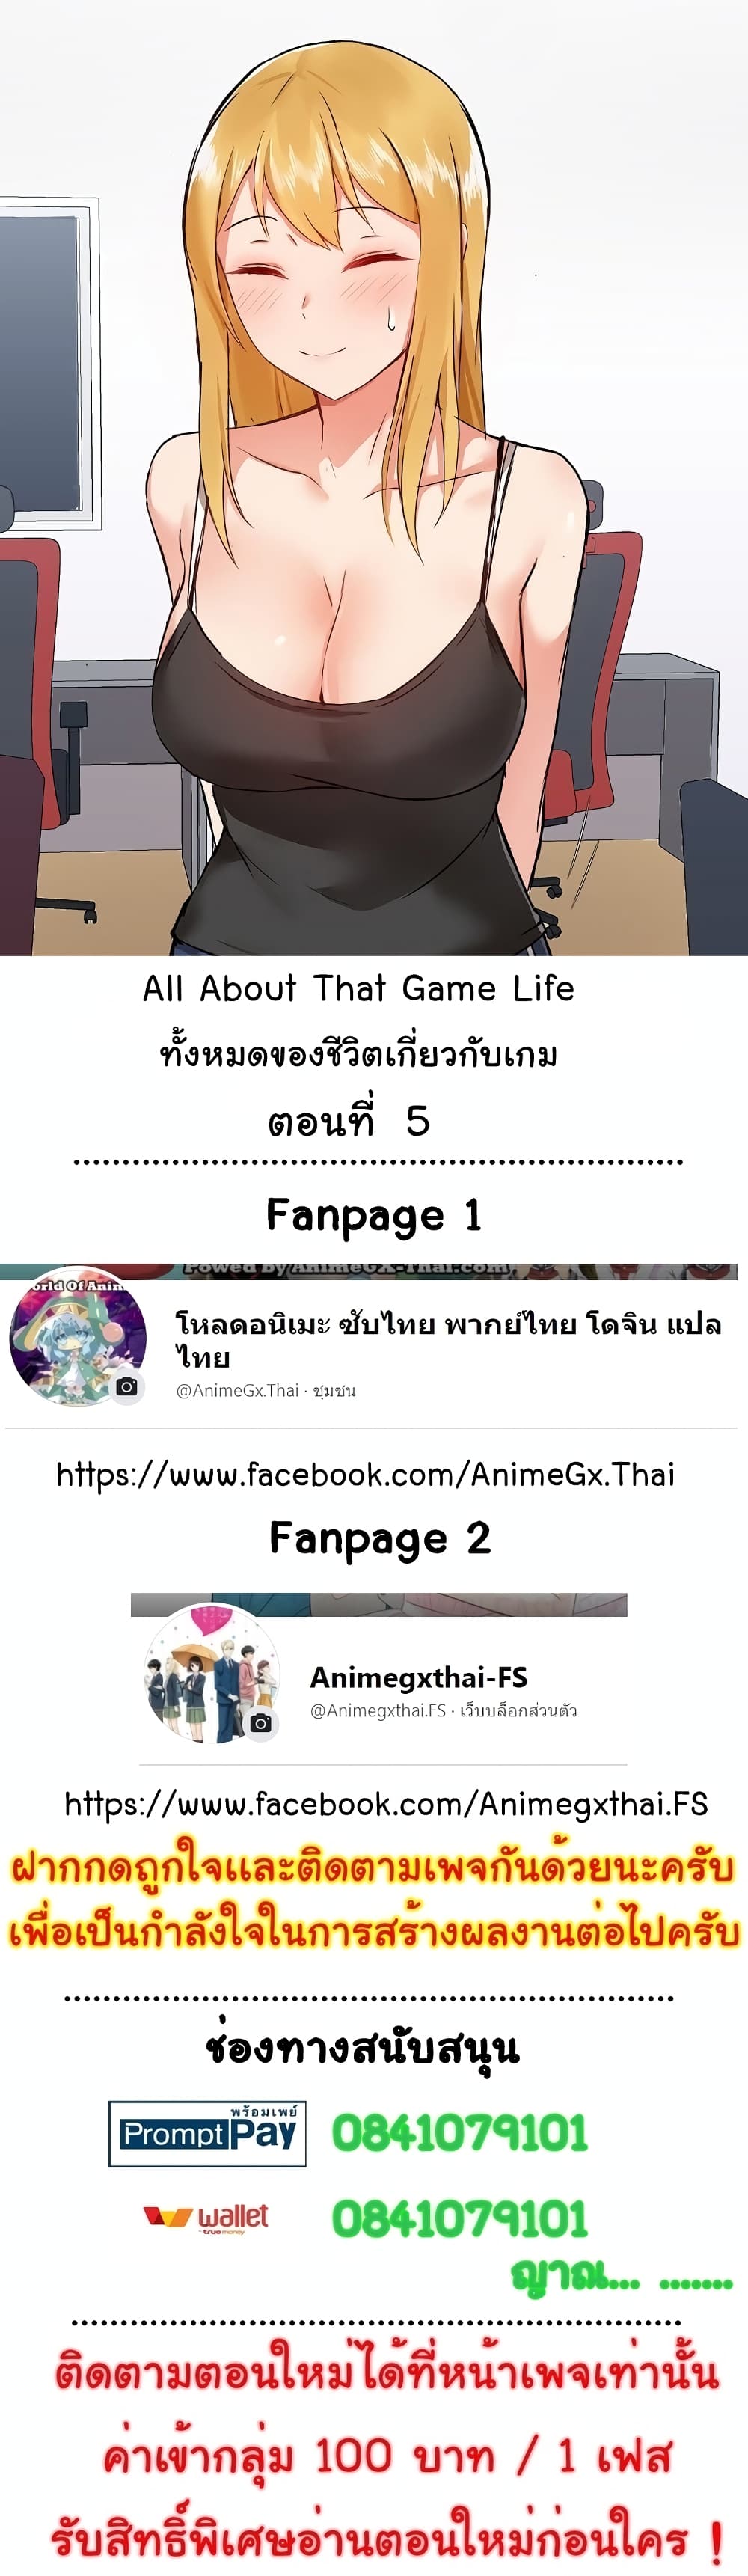 All About That Game Life 5 ภาพที่ 1